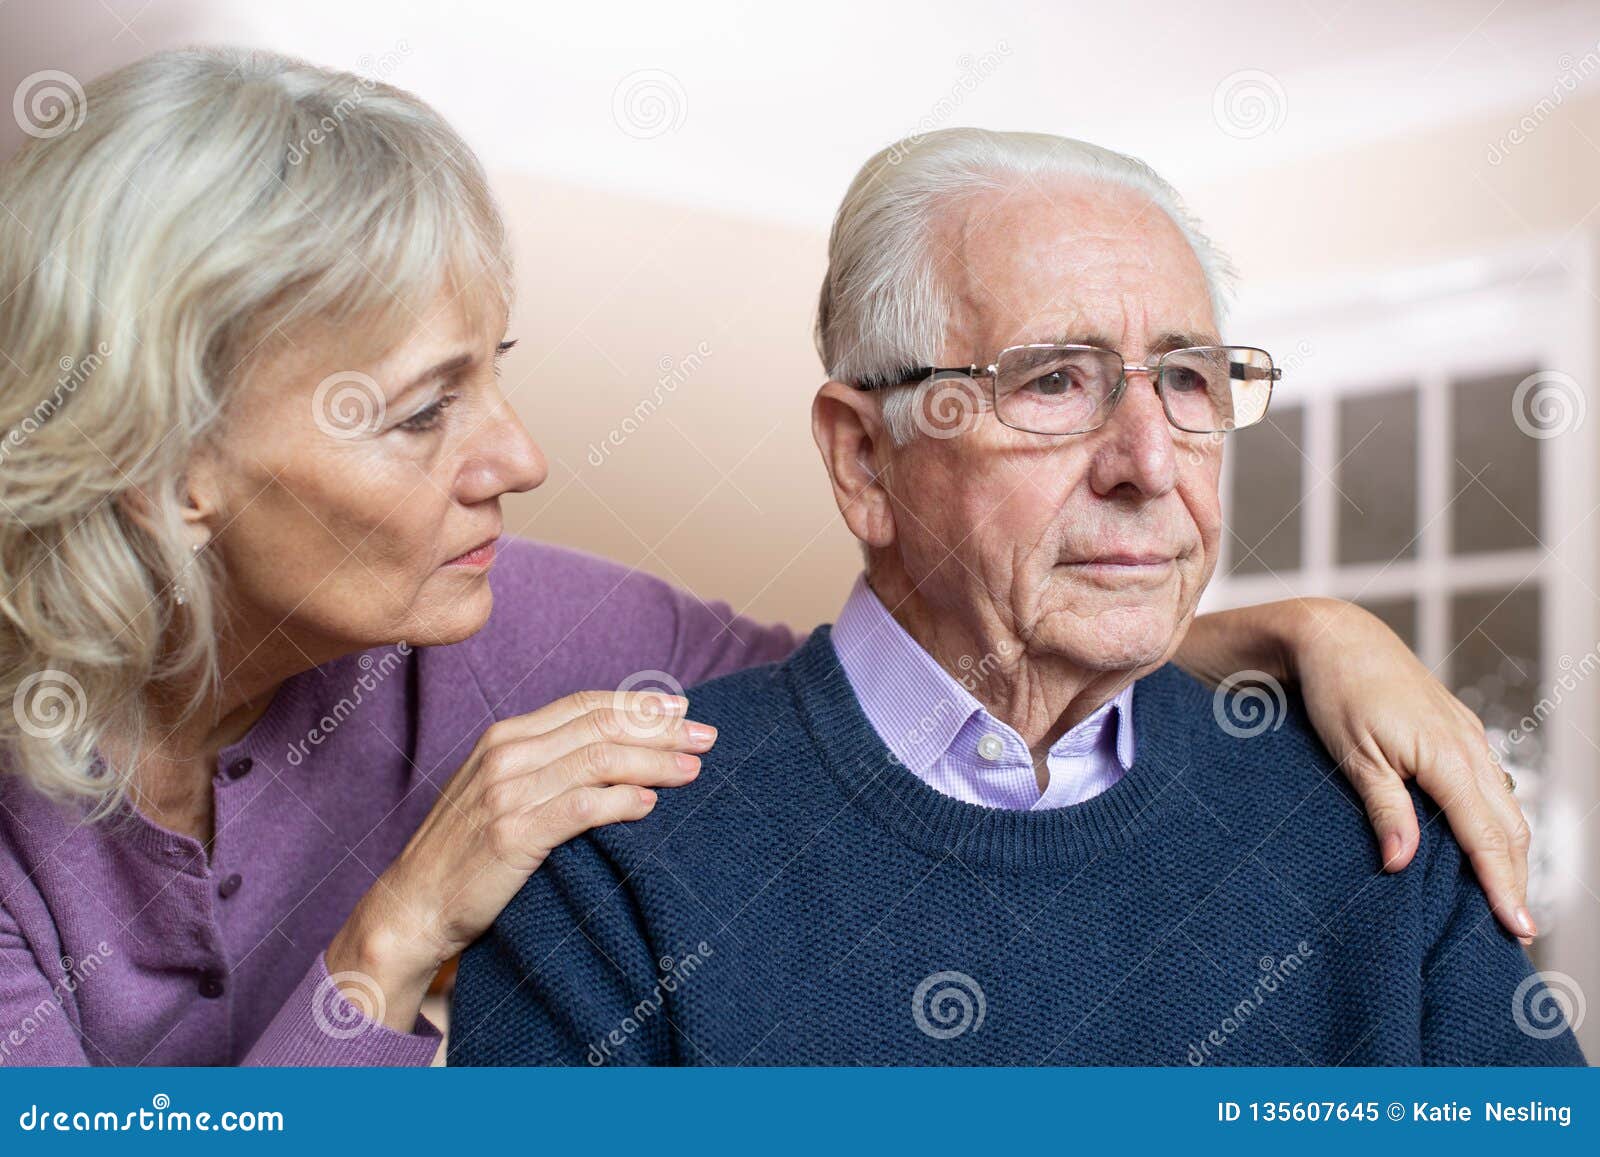 confused senior man suffering with depression and dementia being comforted by wife